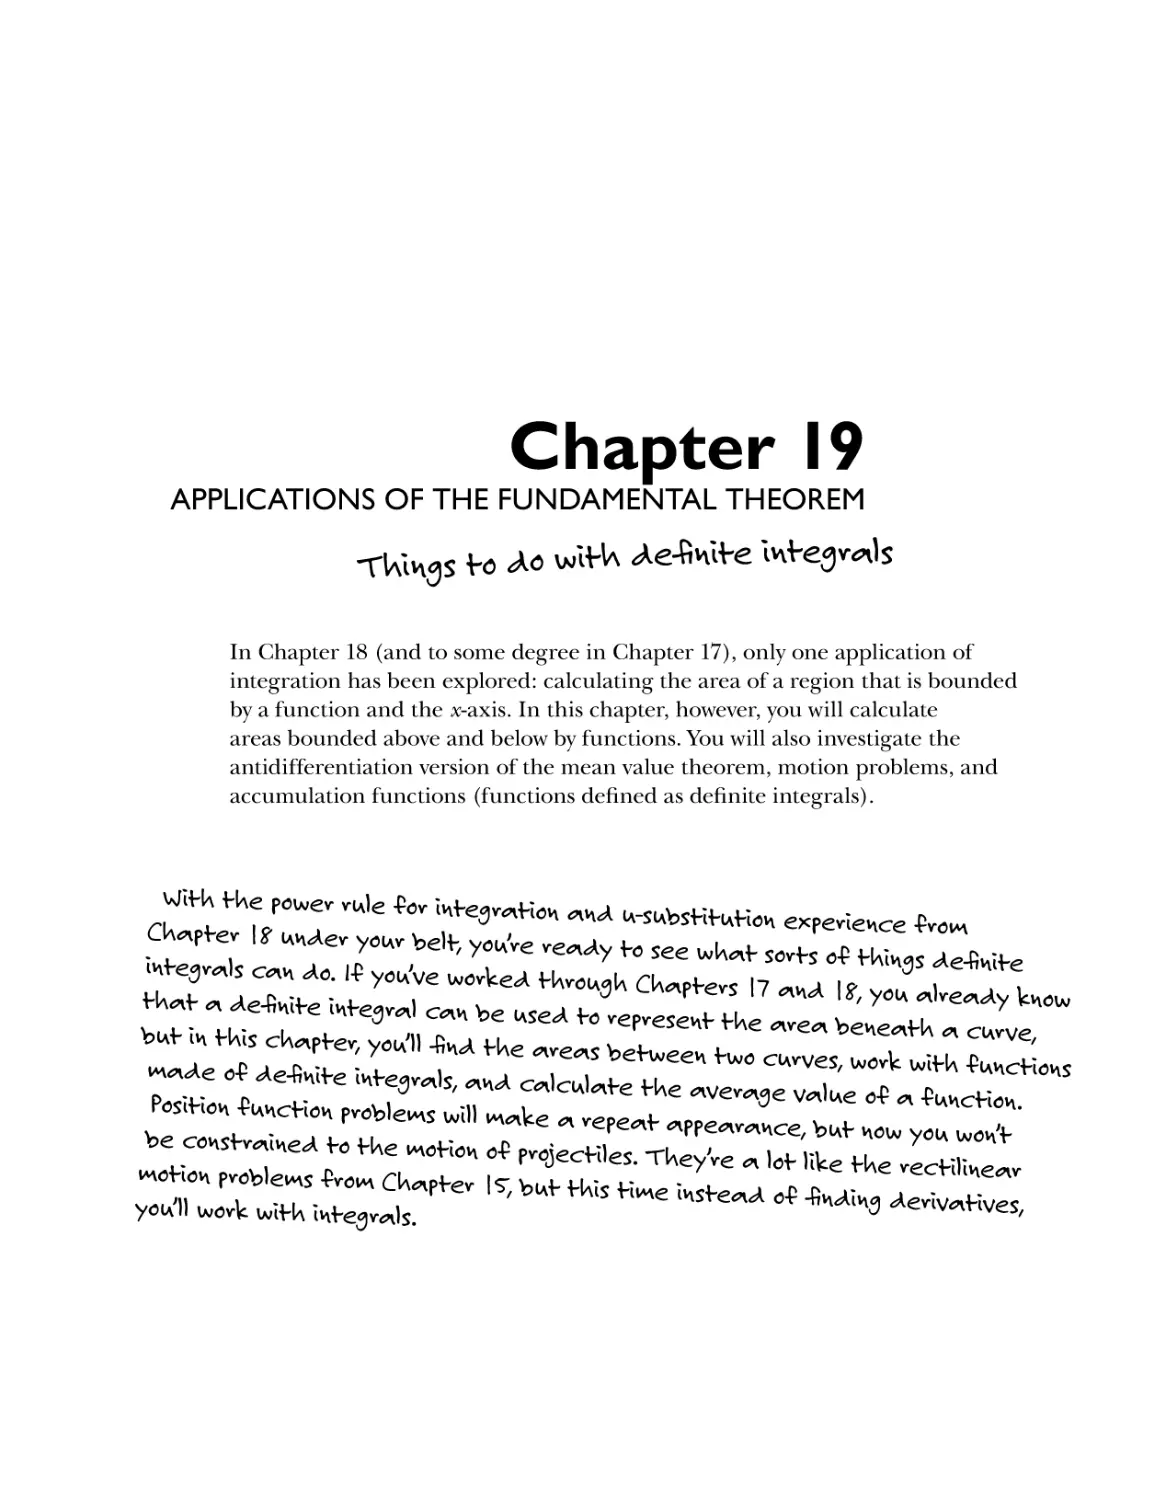 Chapter 19: Applications of the Fundamental Theorem 319